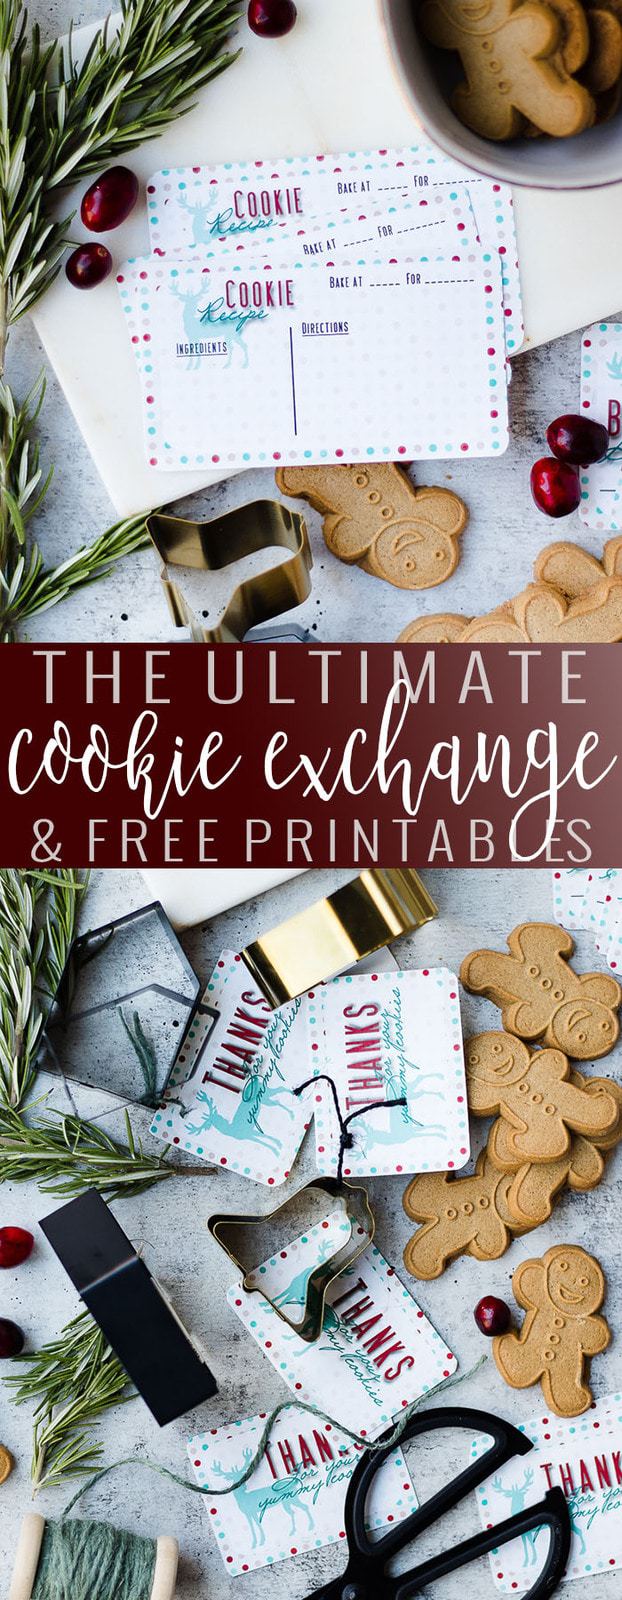 Everything You Need To Host A Cookie Exchange | holiday cookie exchange | holiday party ideas | christmas cookie exchange | hosting a holiday party || Oh So Delicioso #holidaycookieexchange #holidaycookies #christmascookies